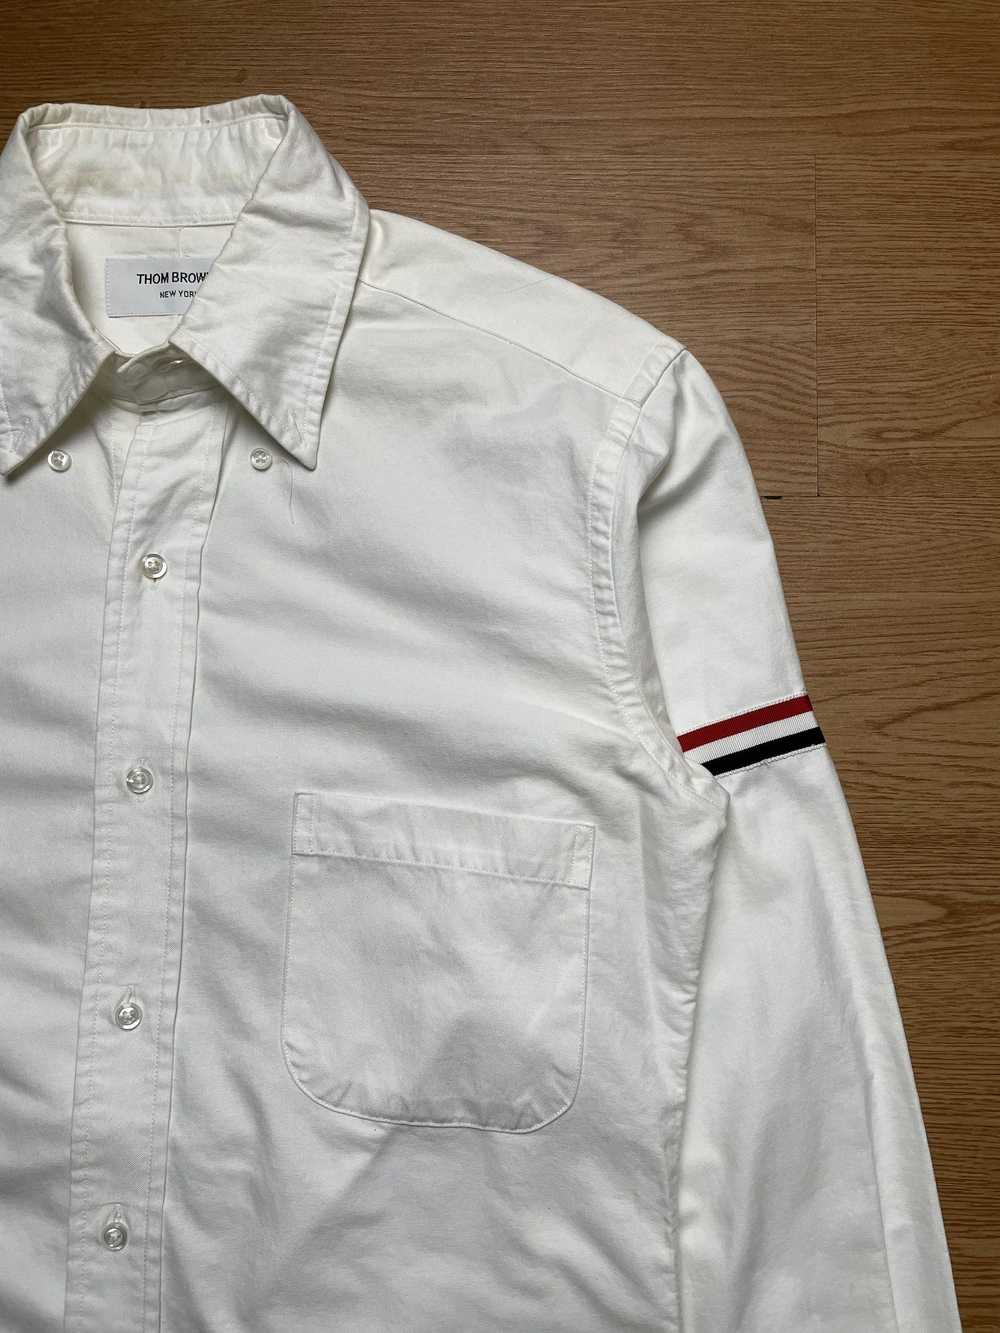 Thom Browne Thom Browne Button up Shirt - image 4